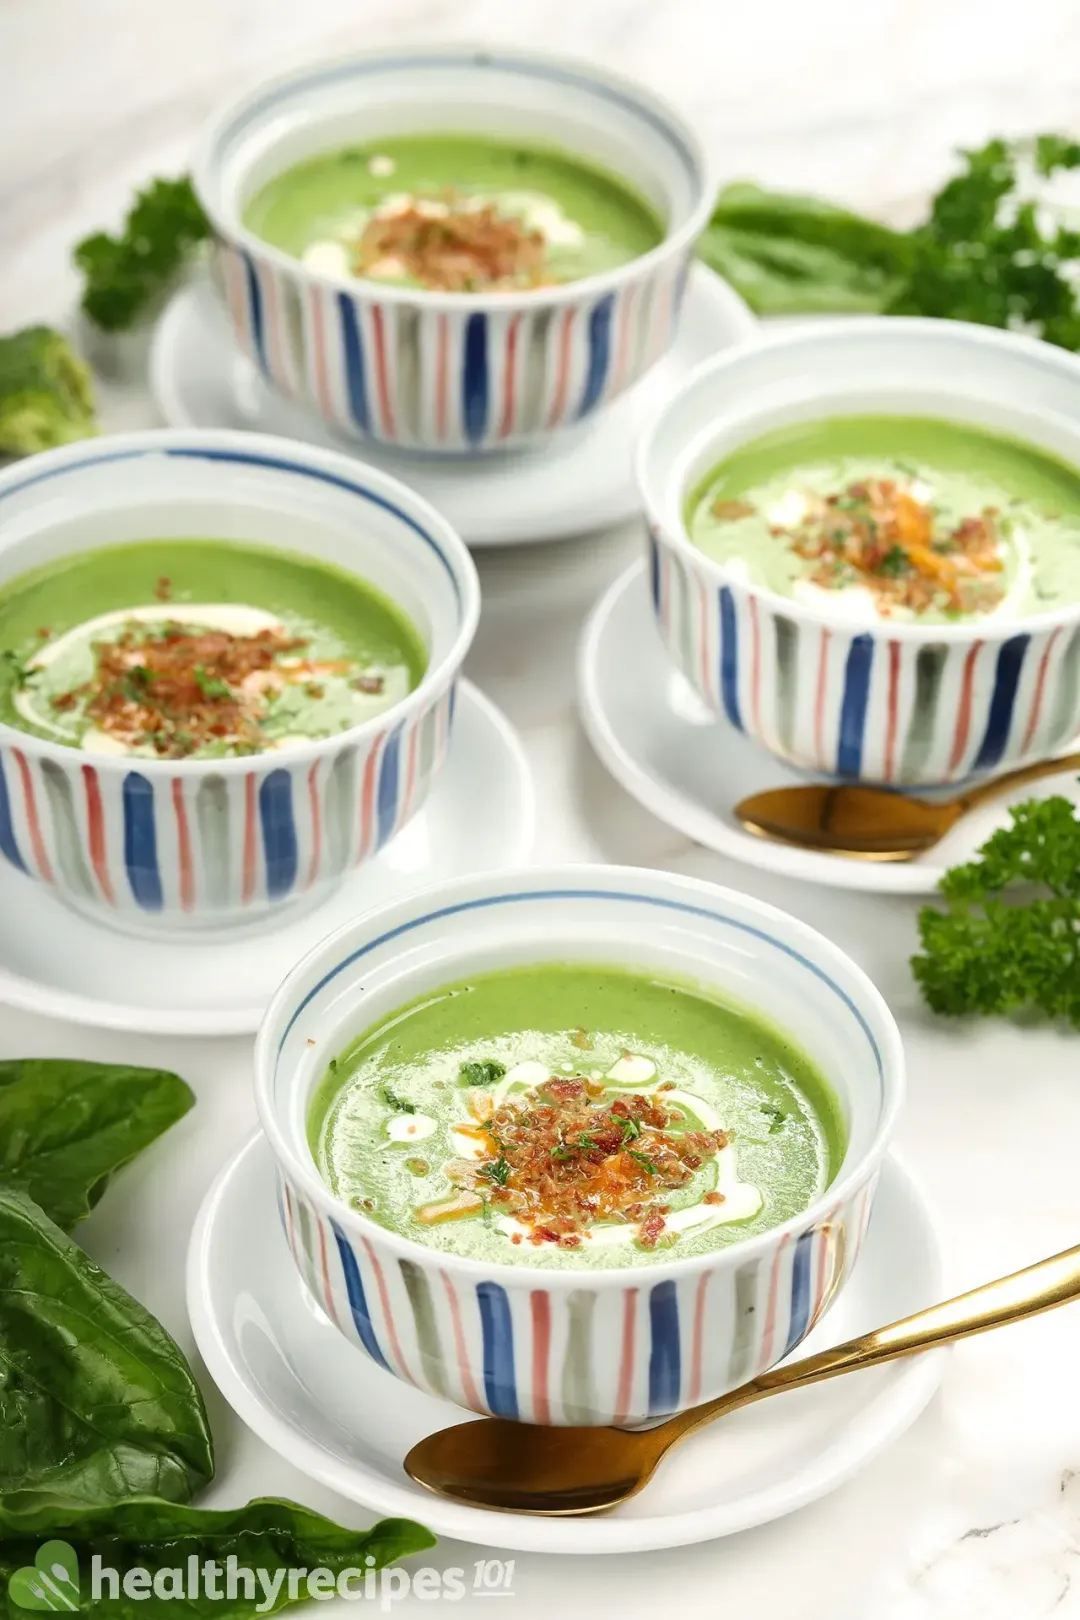 Storage and Reheating Cream of Spinach Soup